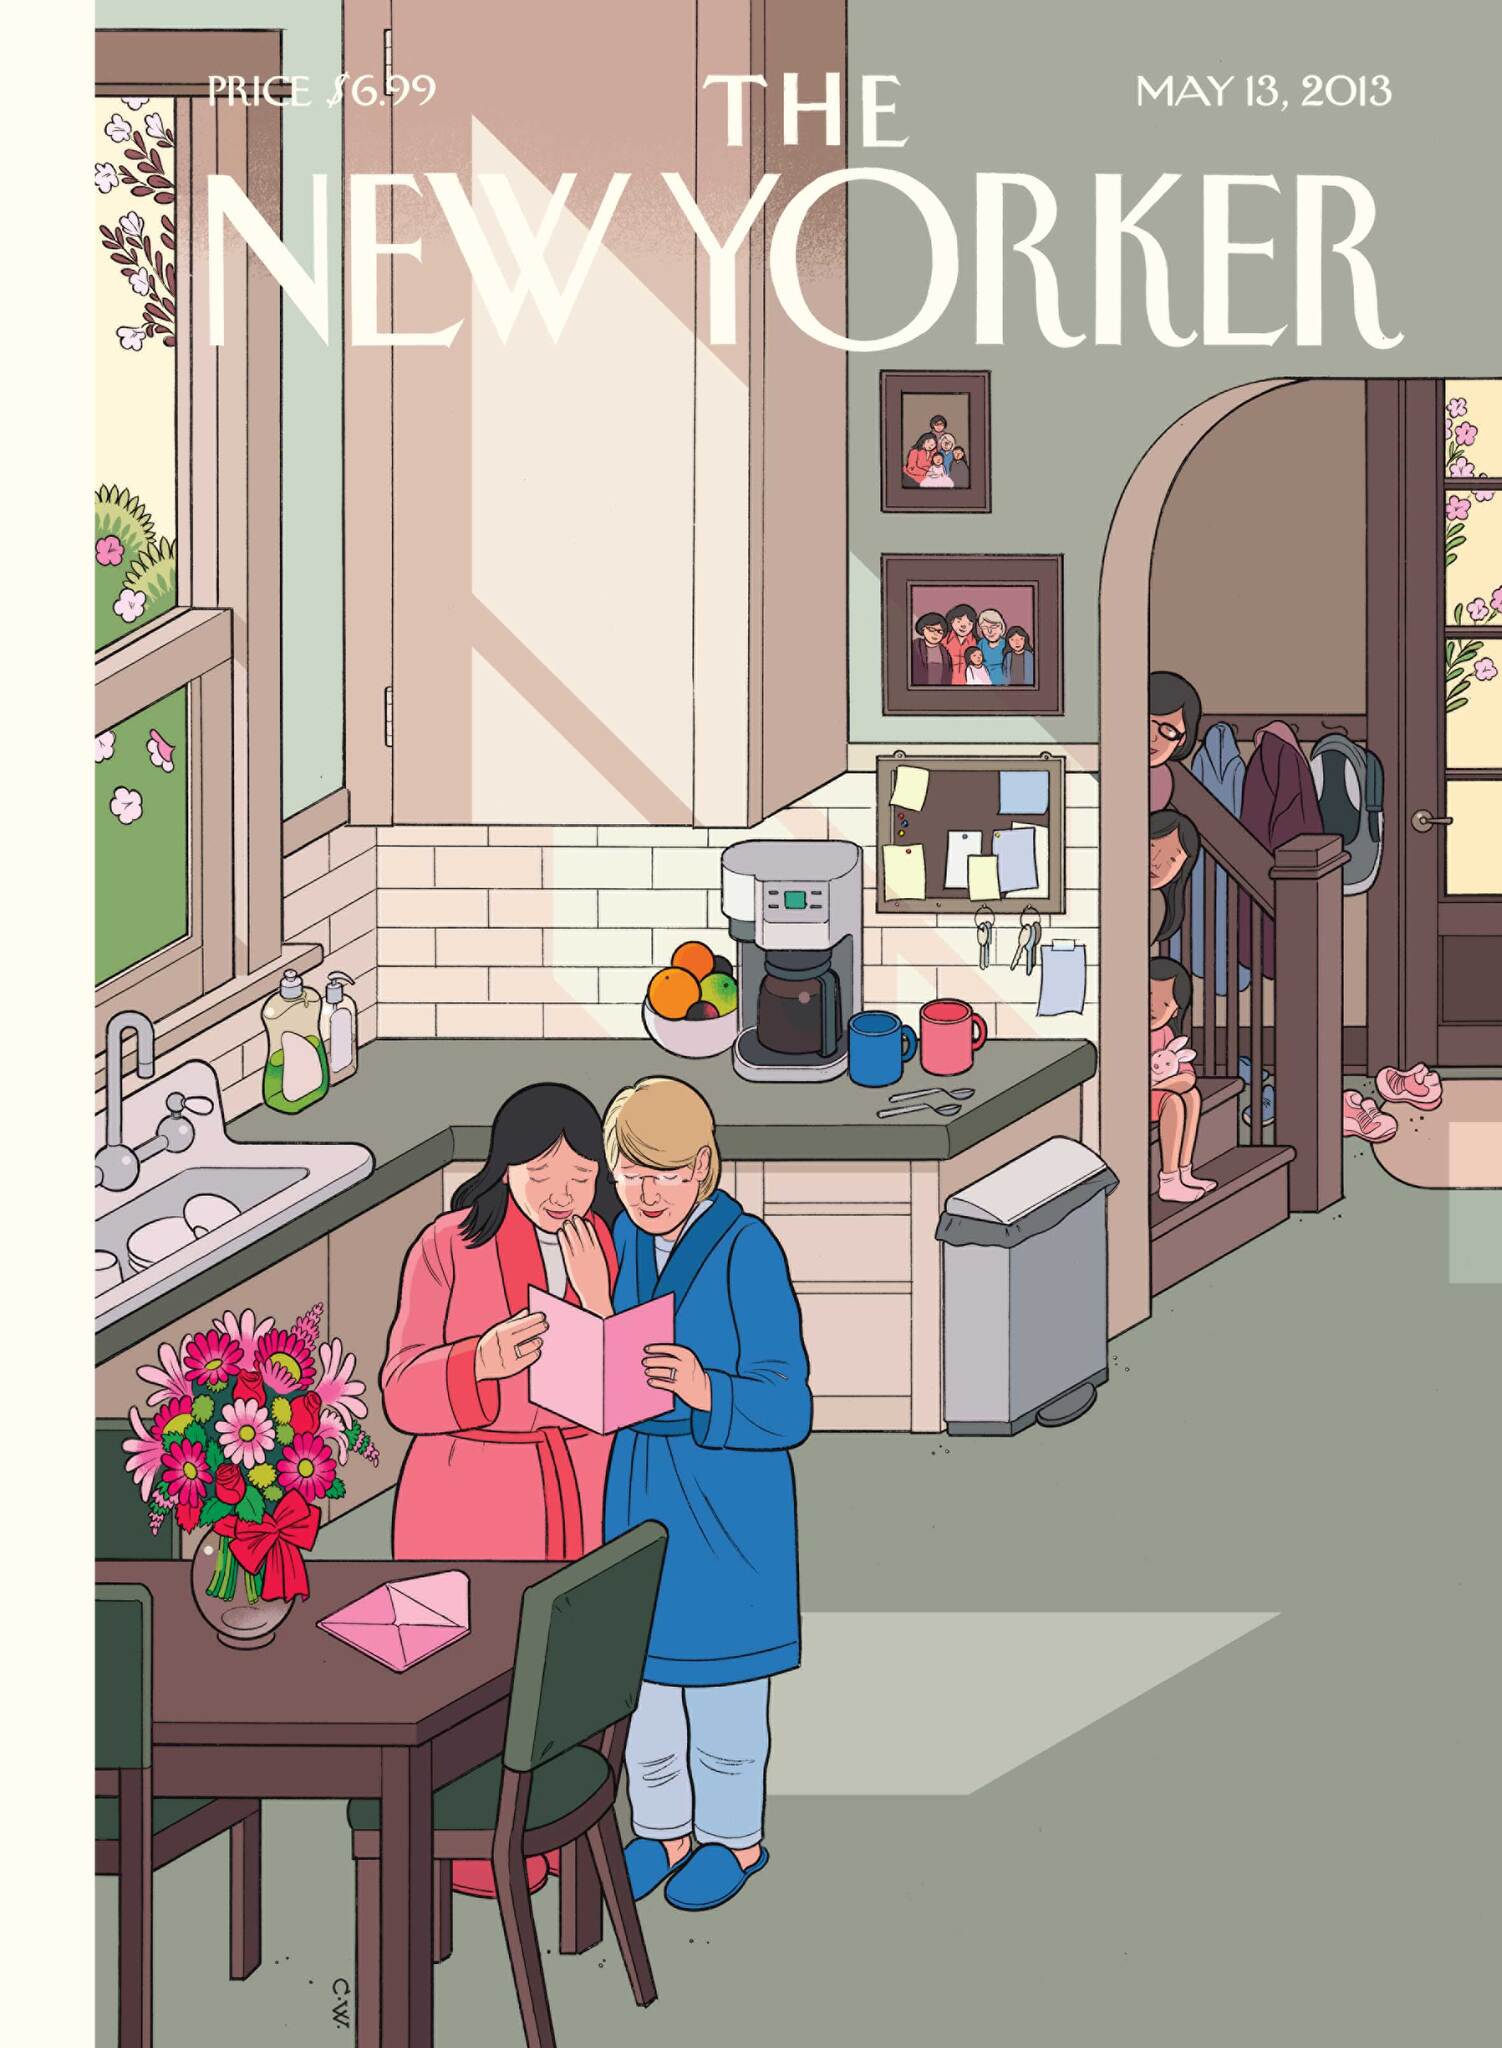 "Mother's Day Morning" New Yorker Cover Mother's Day Card